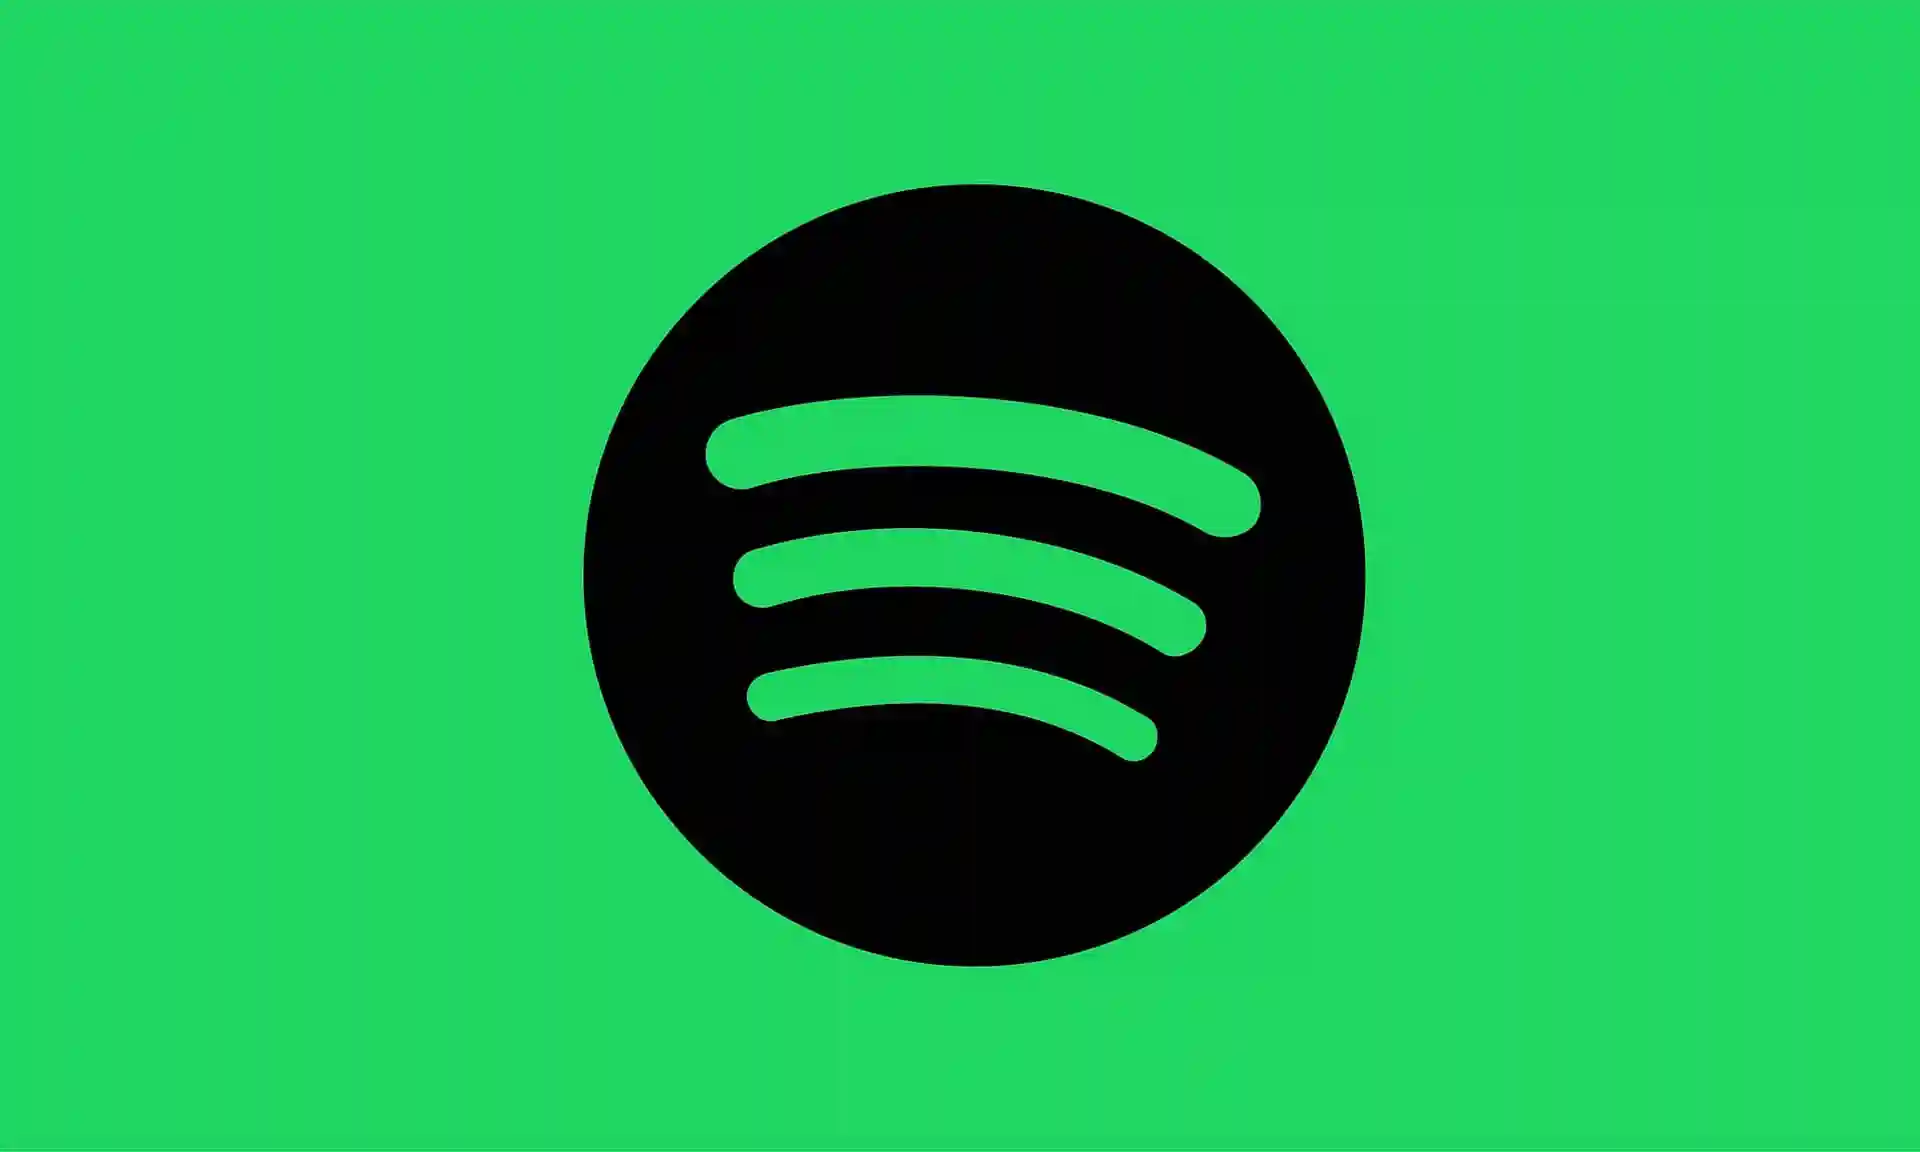 Spotify Versus Youtube Music - Which Is Better?